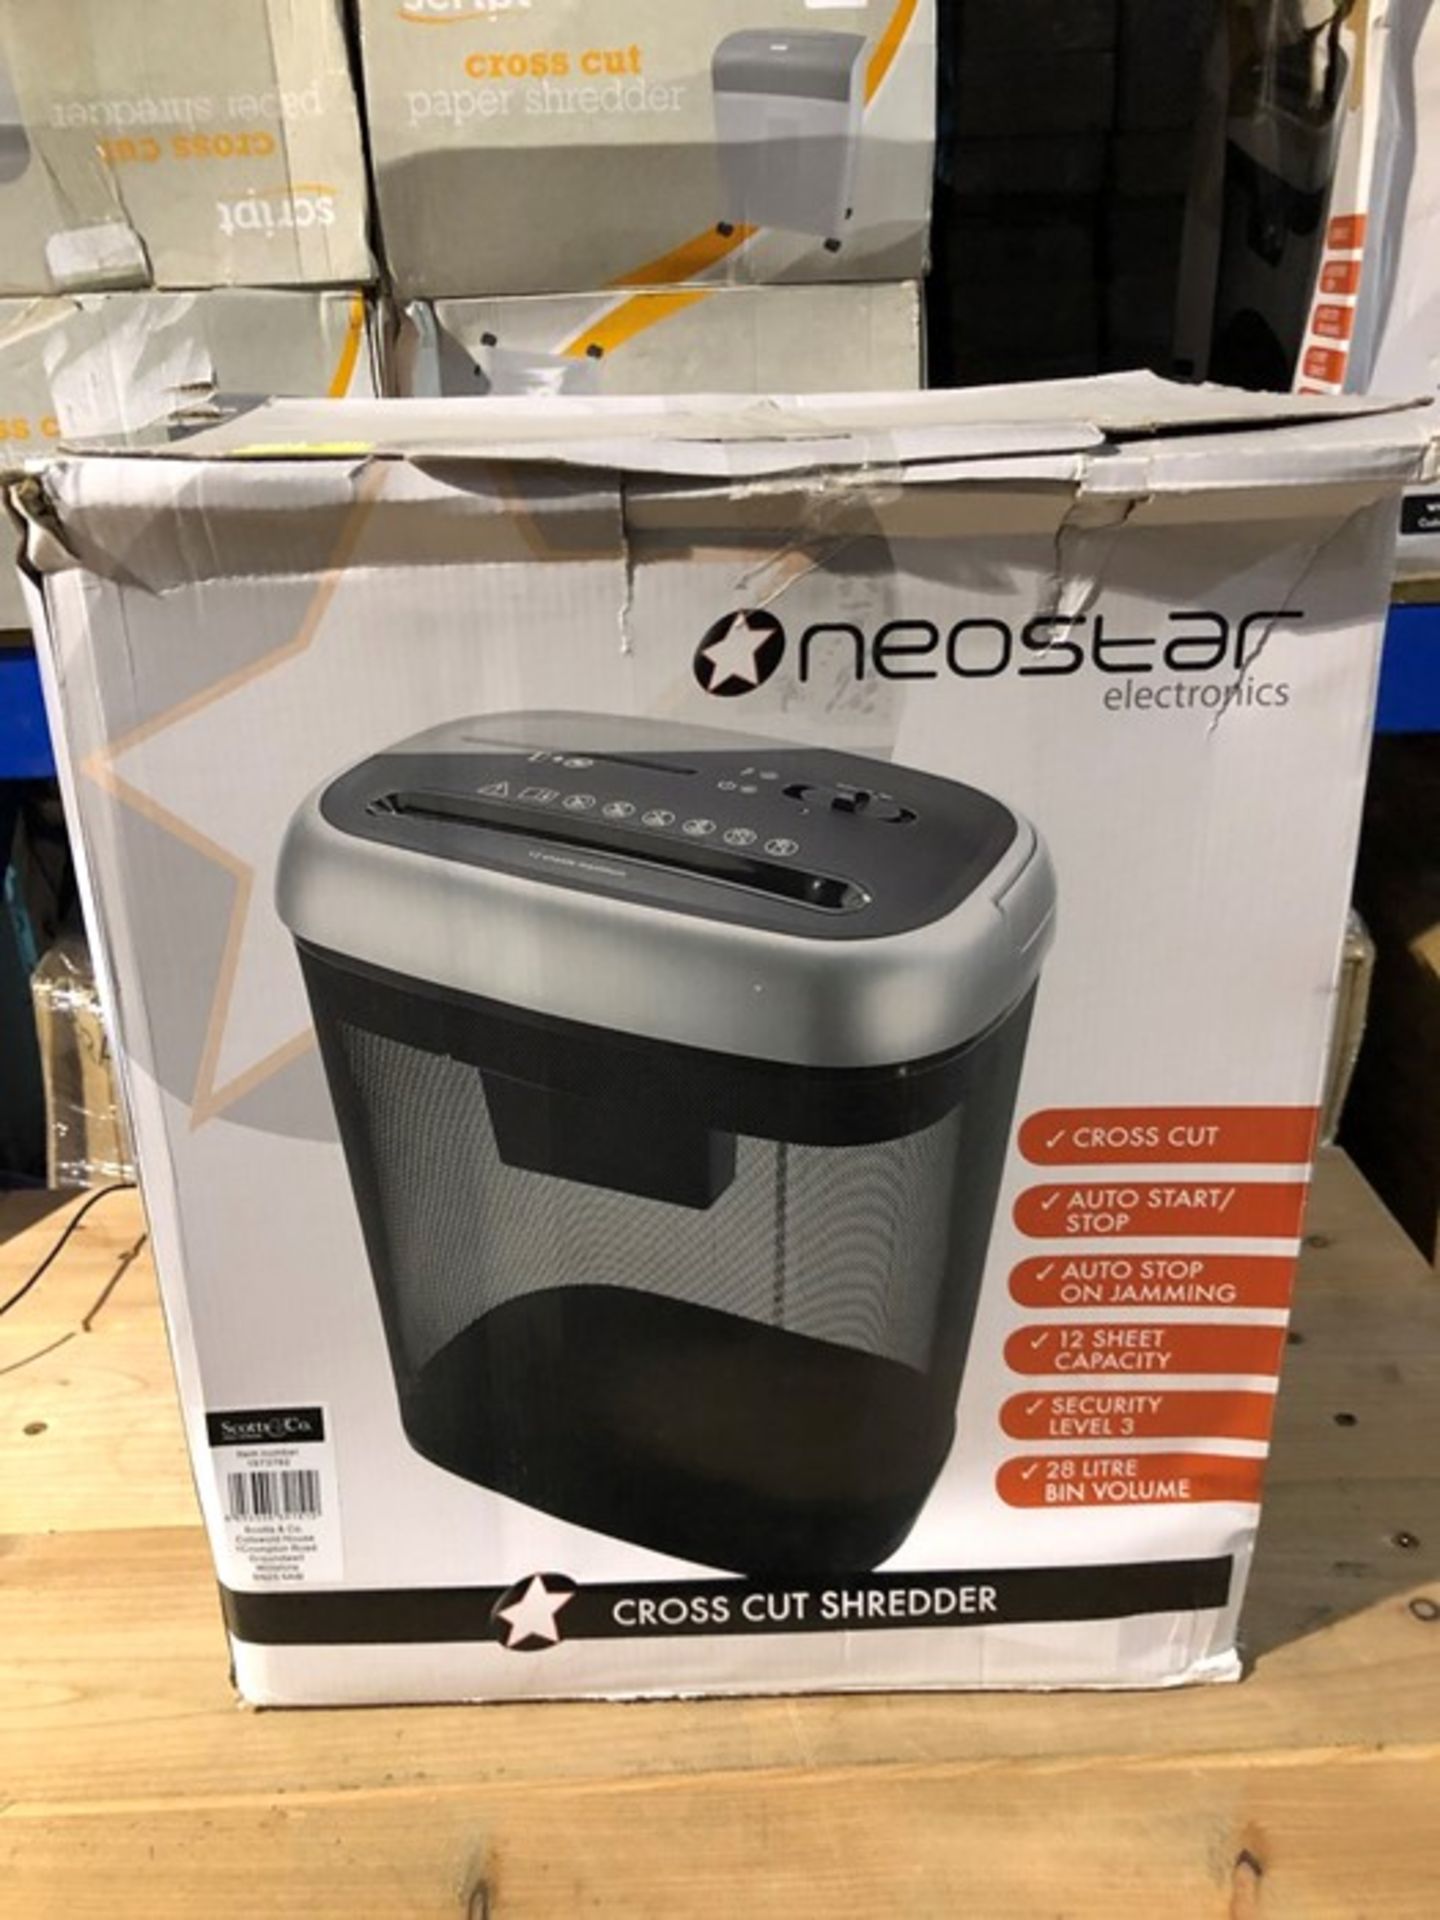 1 BOXED NEOSTAR ELECTRONICS CROSS CUT SHREDDER / RRP £99.95 (PUBLIC VIEWING AVAILABLE)